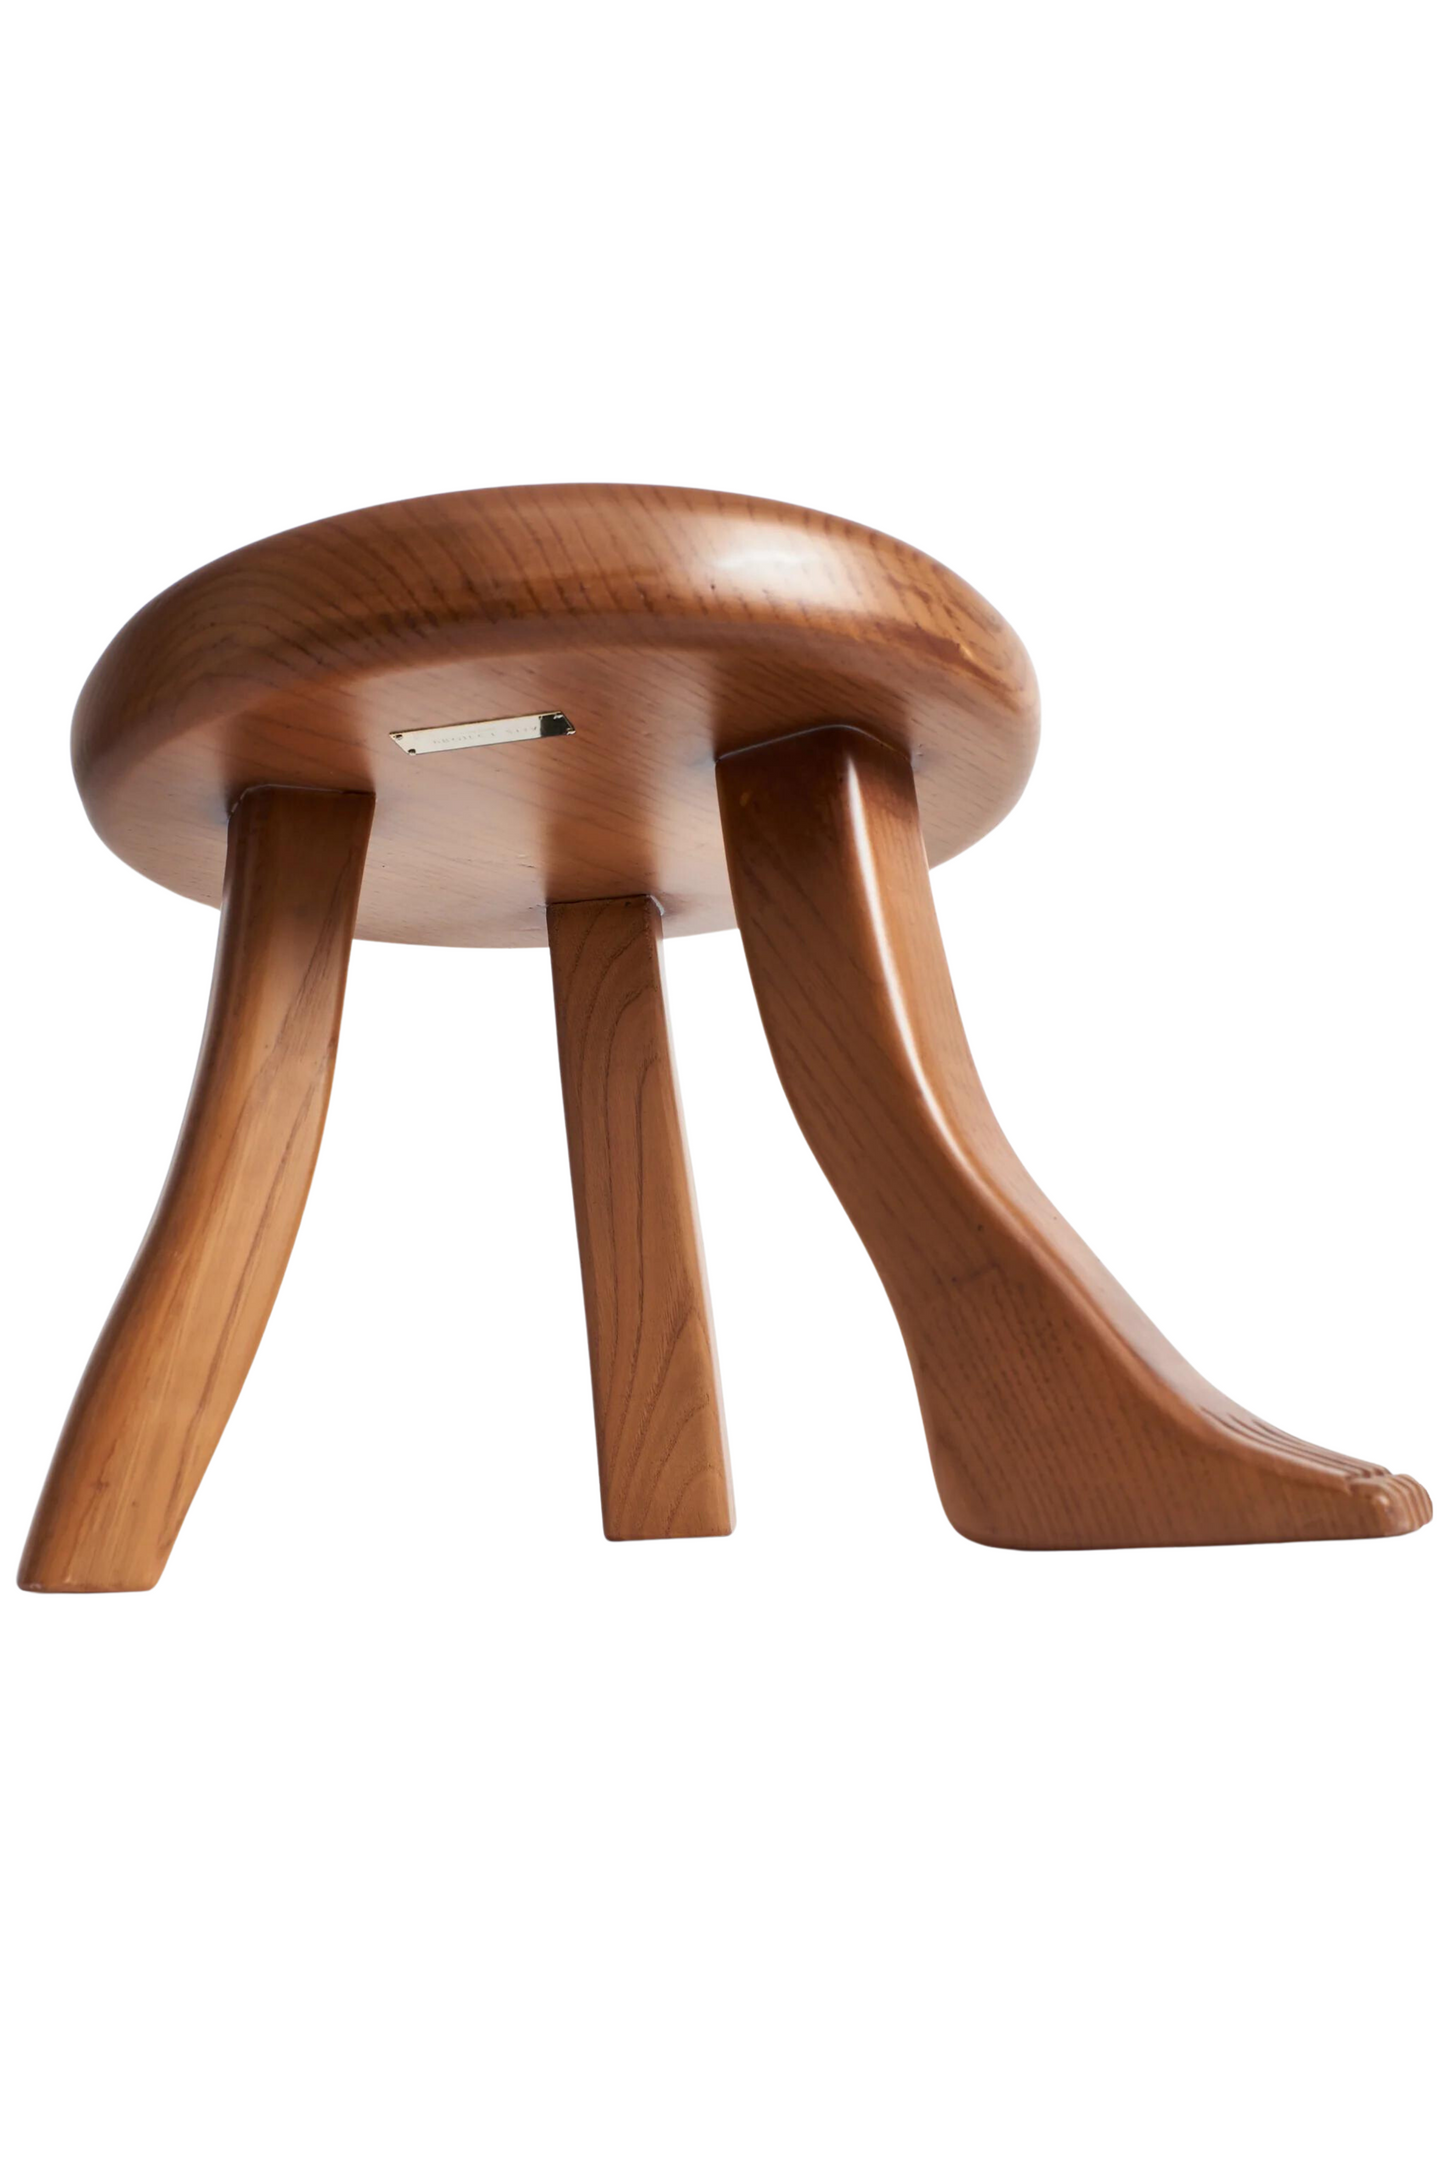 PROJECT 213A // WOODEN FOOT STOOL